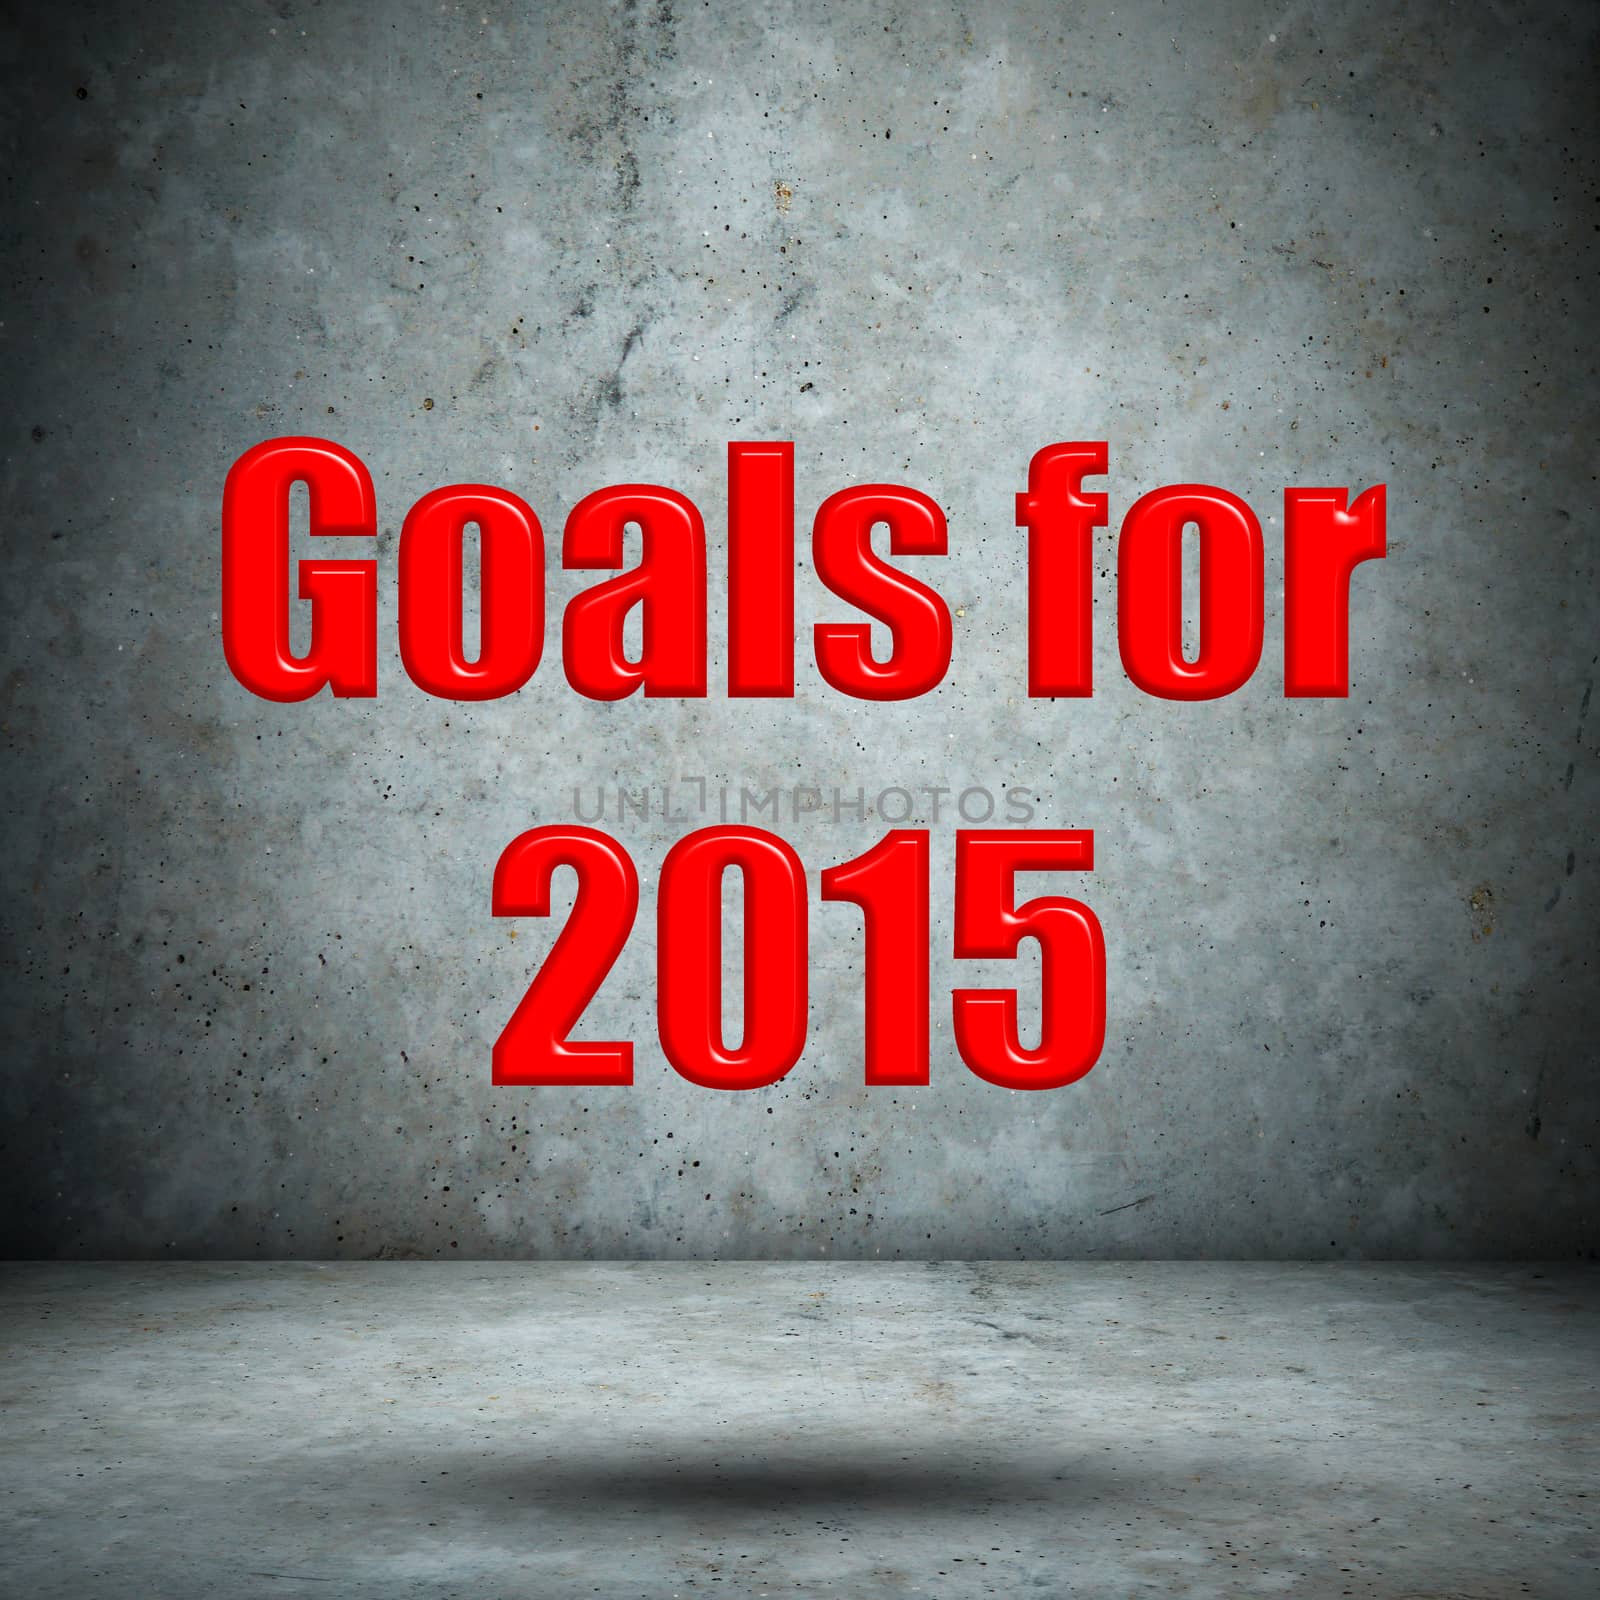 Goals for 2015 on concrete wall